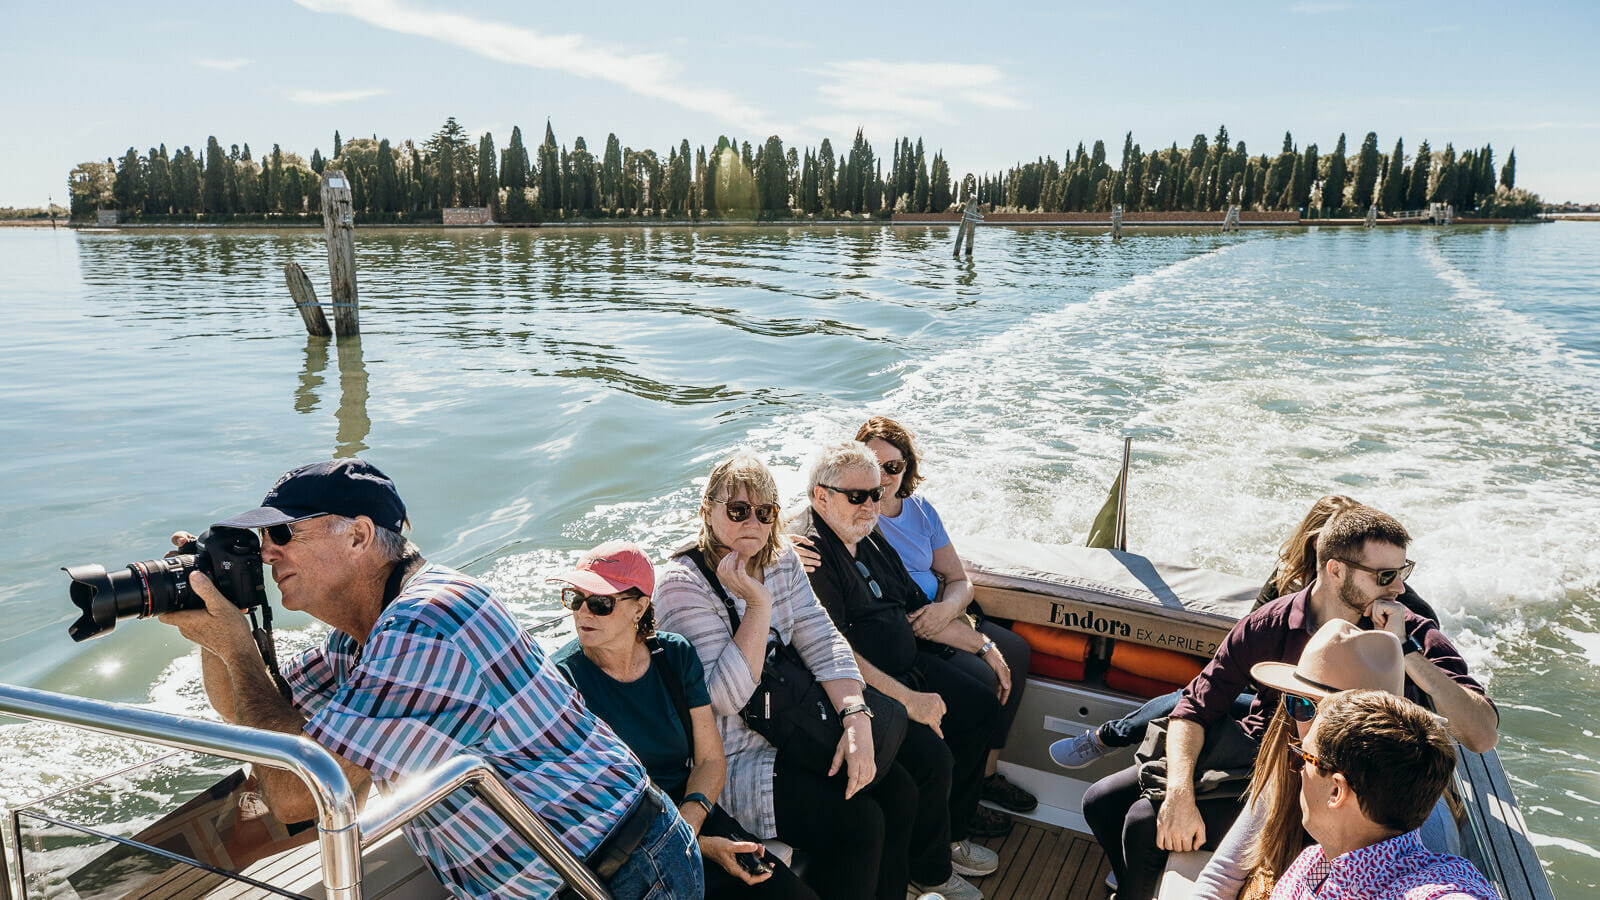 Small group tour boat on the Lagoons of Venice